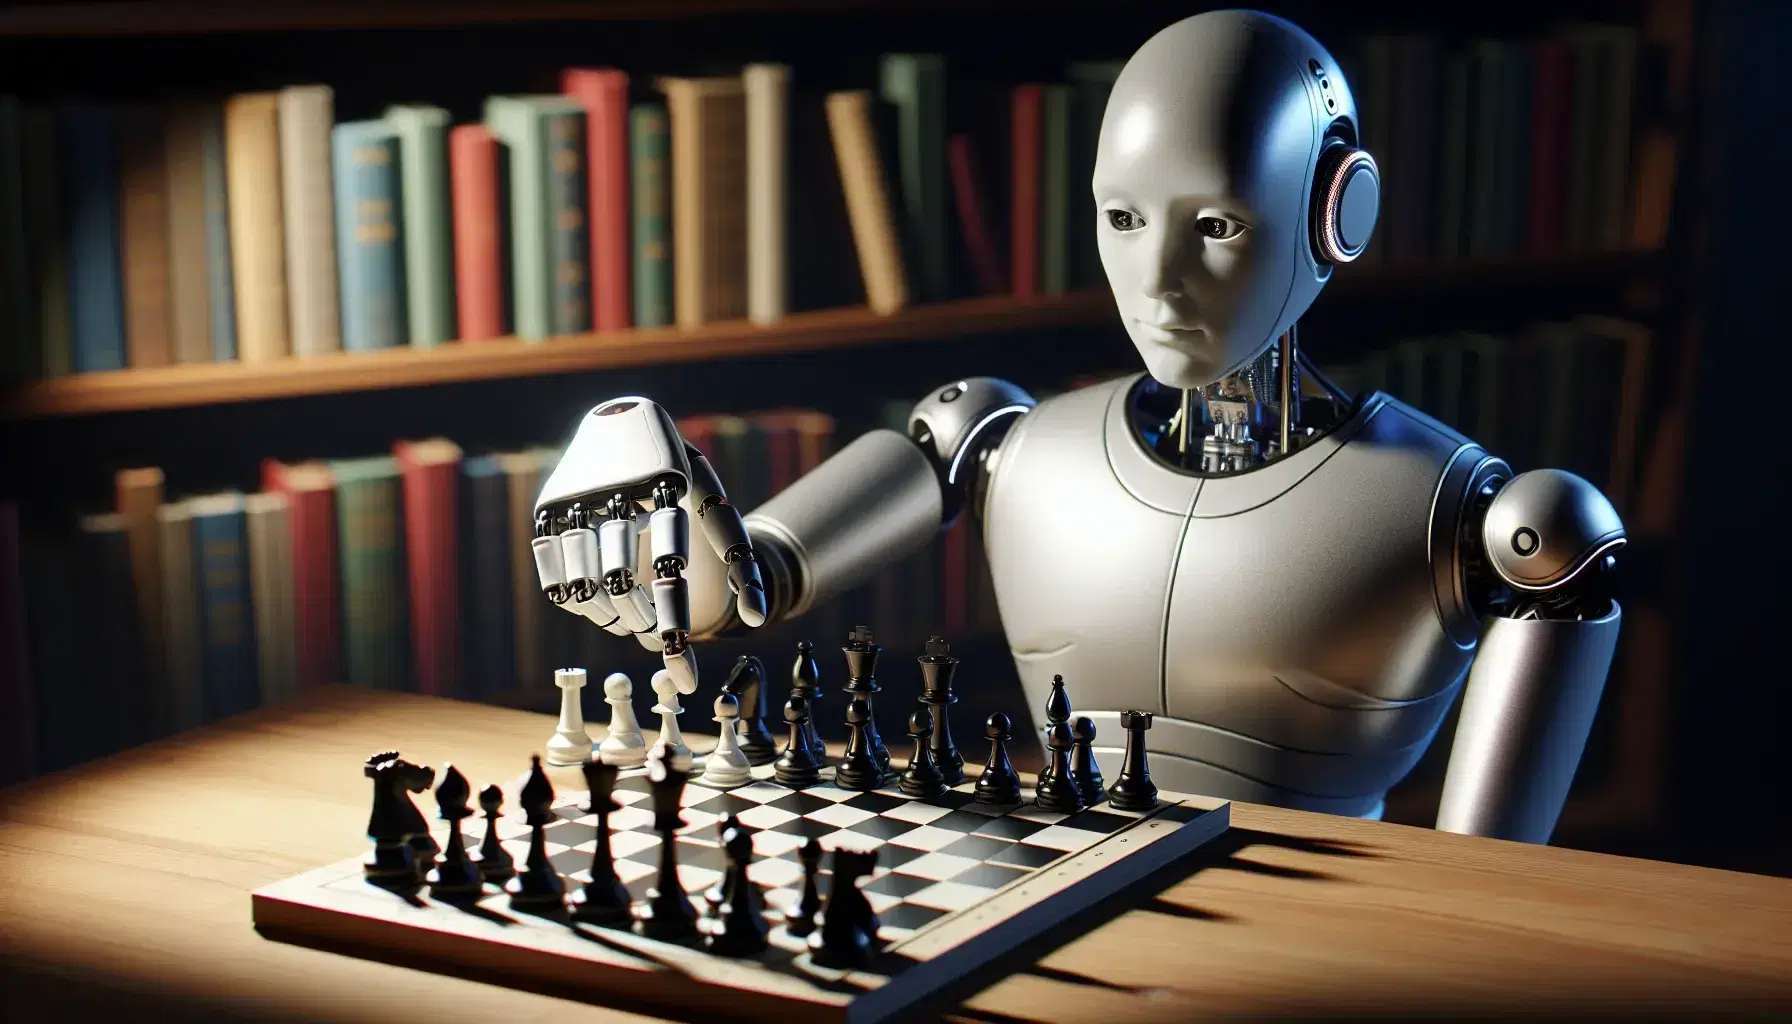 Humanoid robot sitting at a desk plays chess, with hand on white pawn and blurry library background.